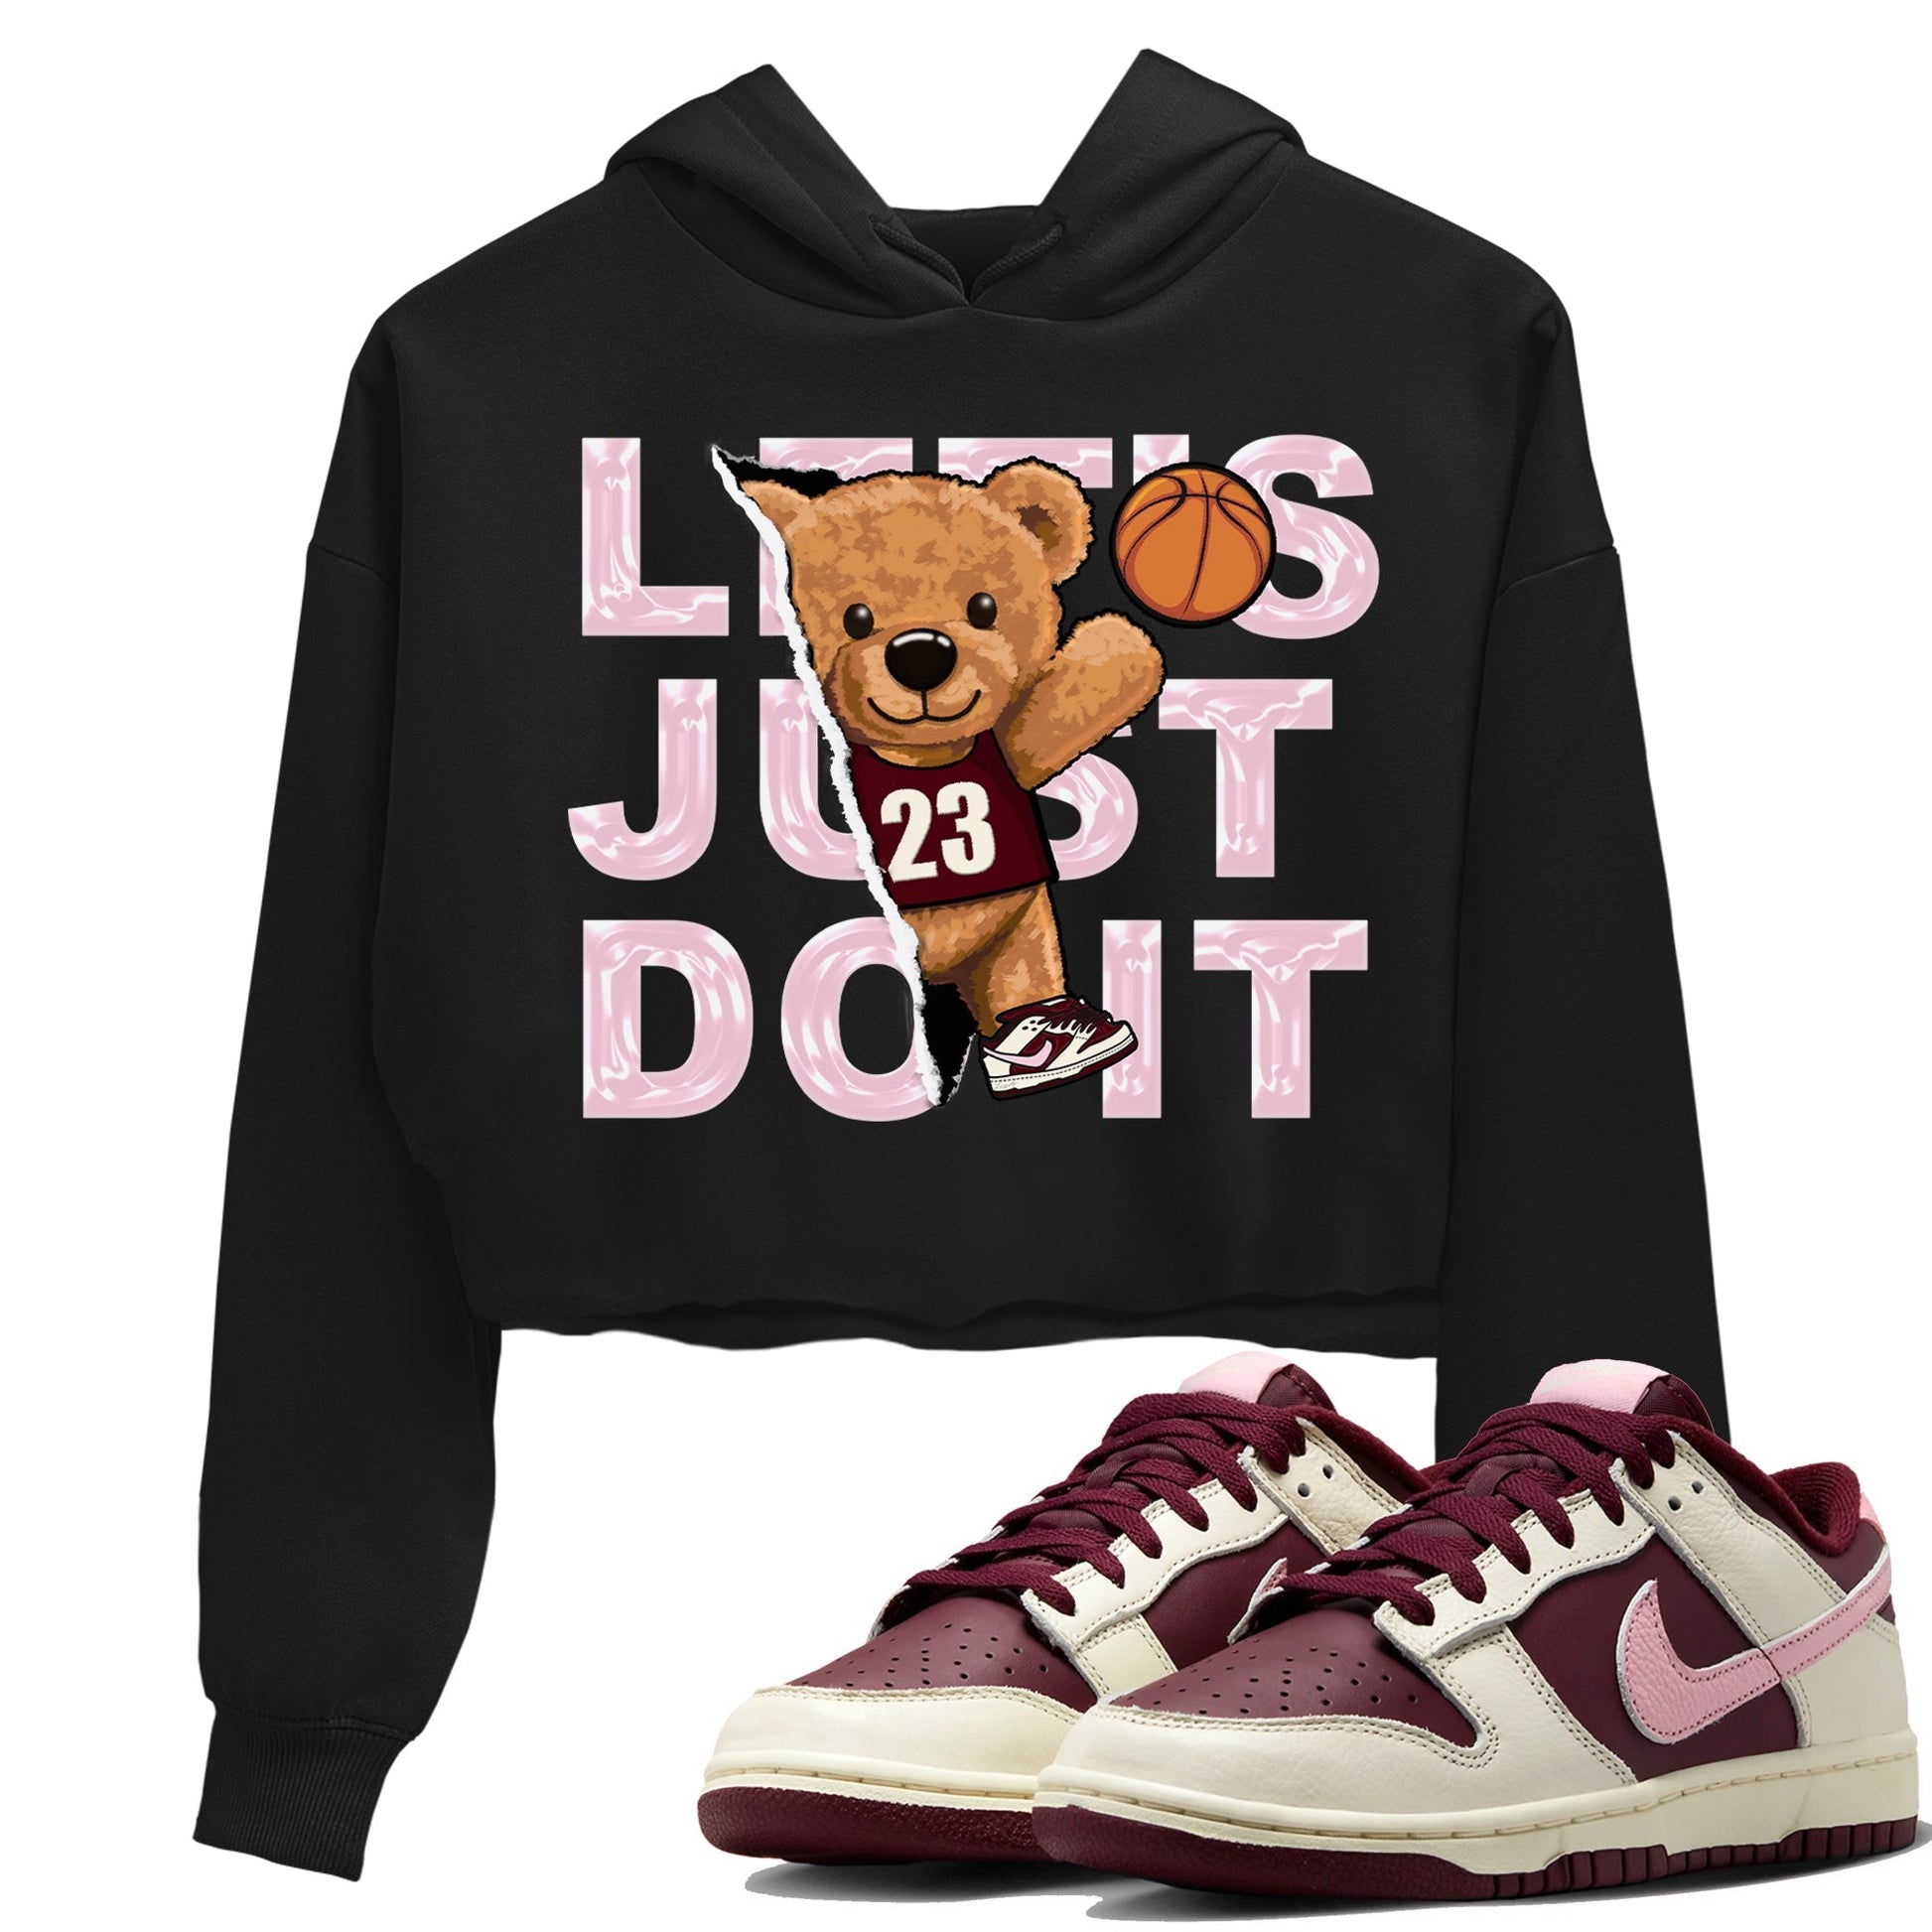 Dunk Valentines Day Sneaker Match Tees Rip Out Bear Sneaker Tees Nike Dunk Valentine's Day Sneaker SNRT Sneaker Tees Women's Shirts